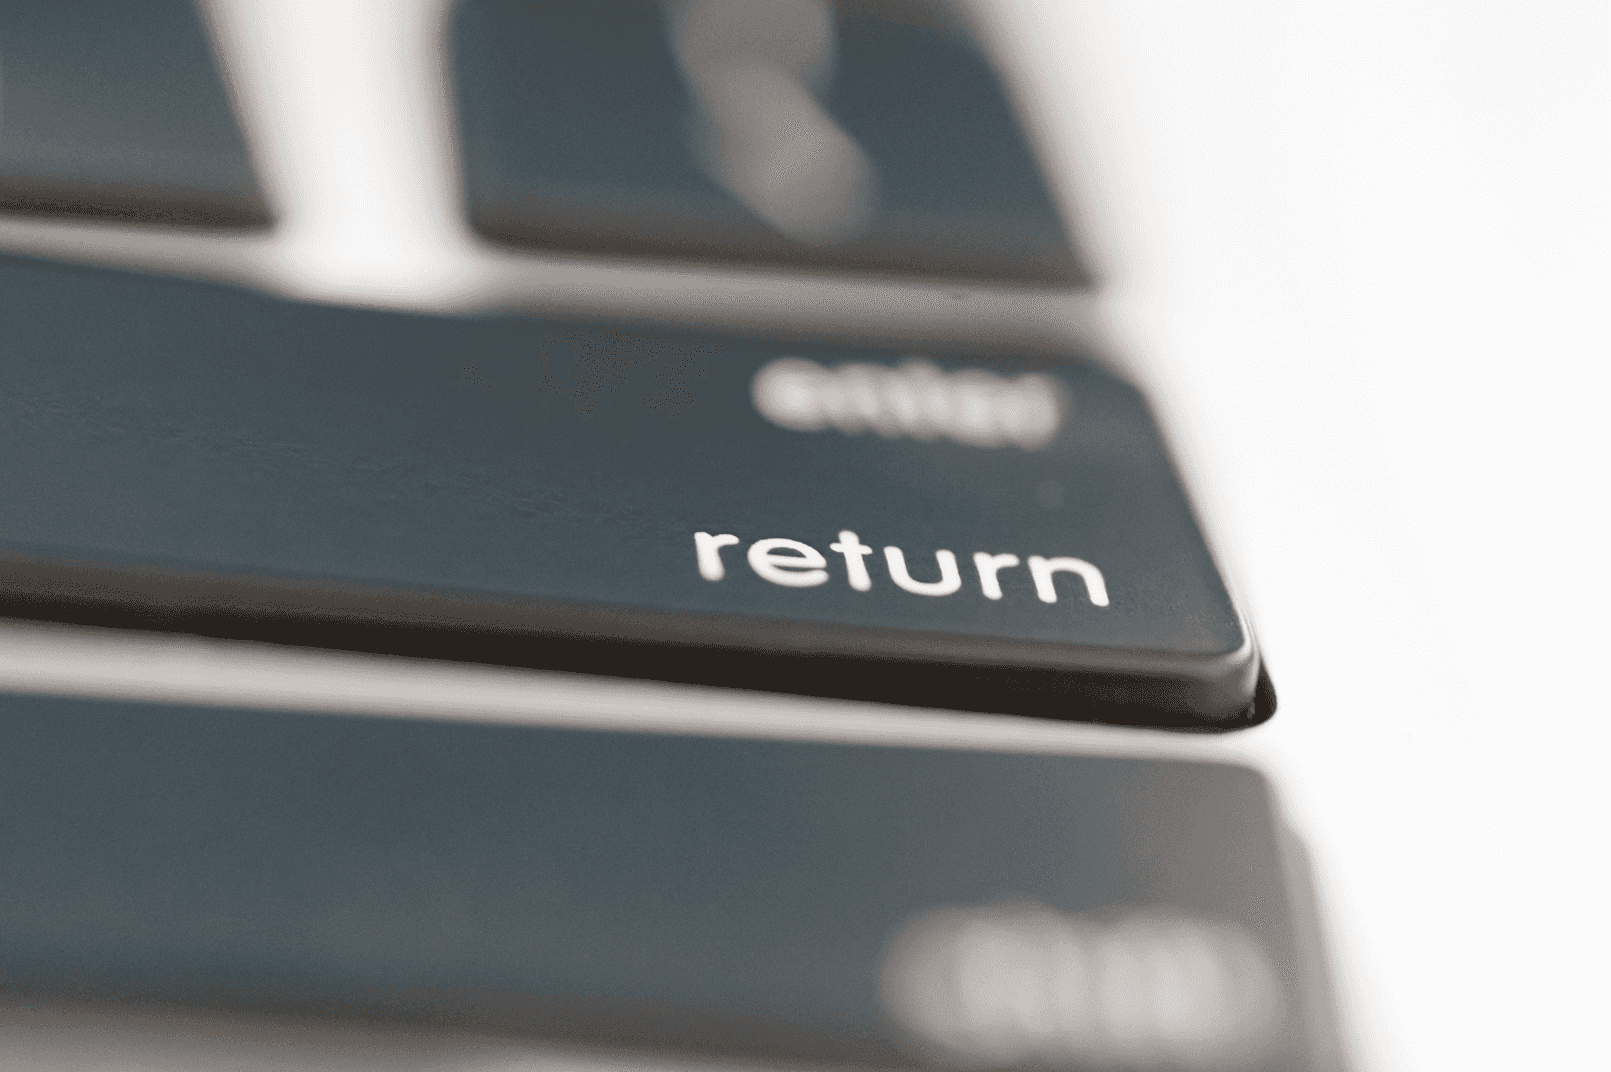 How to Handle eCommerce Returns Like a Pro